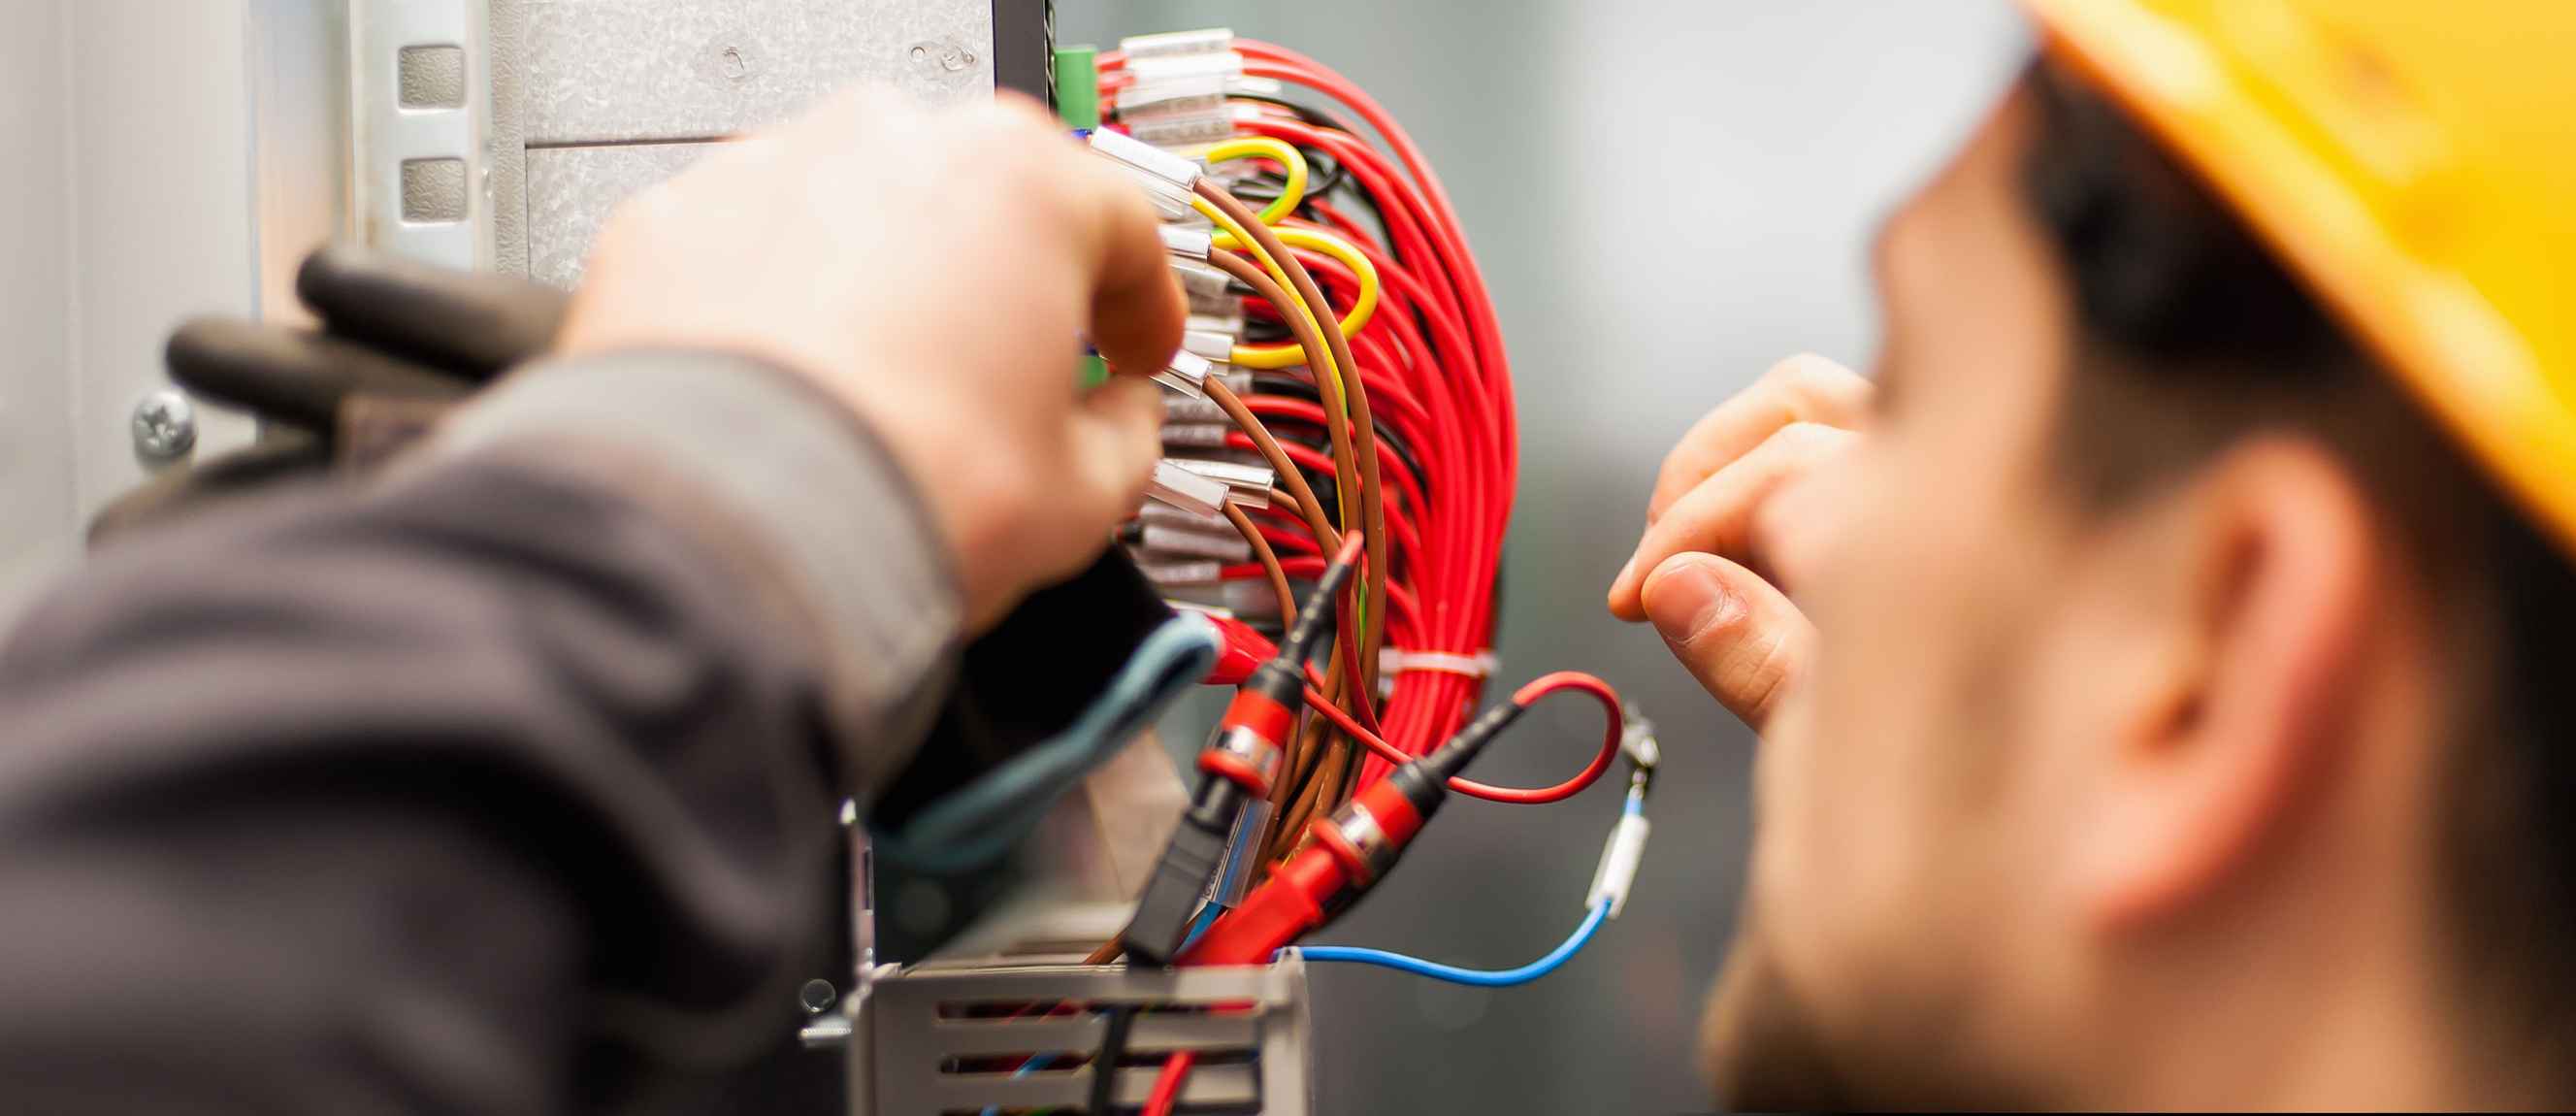 10 Tips For Finding The Right Electrical Contractor For Your Project